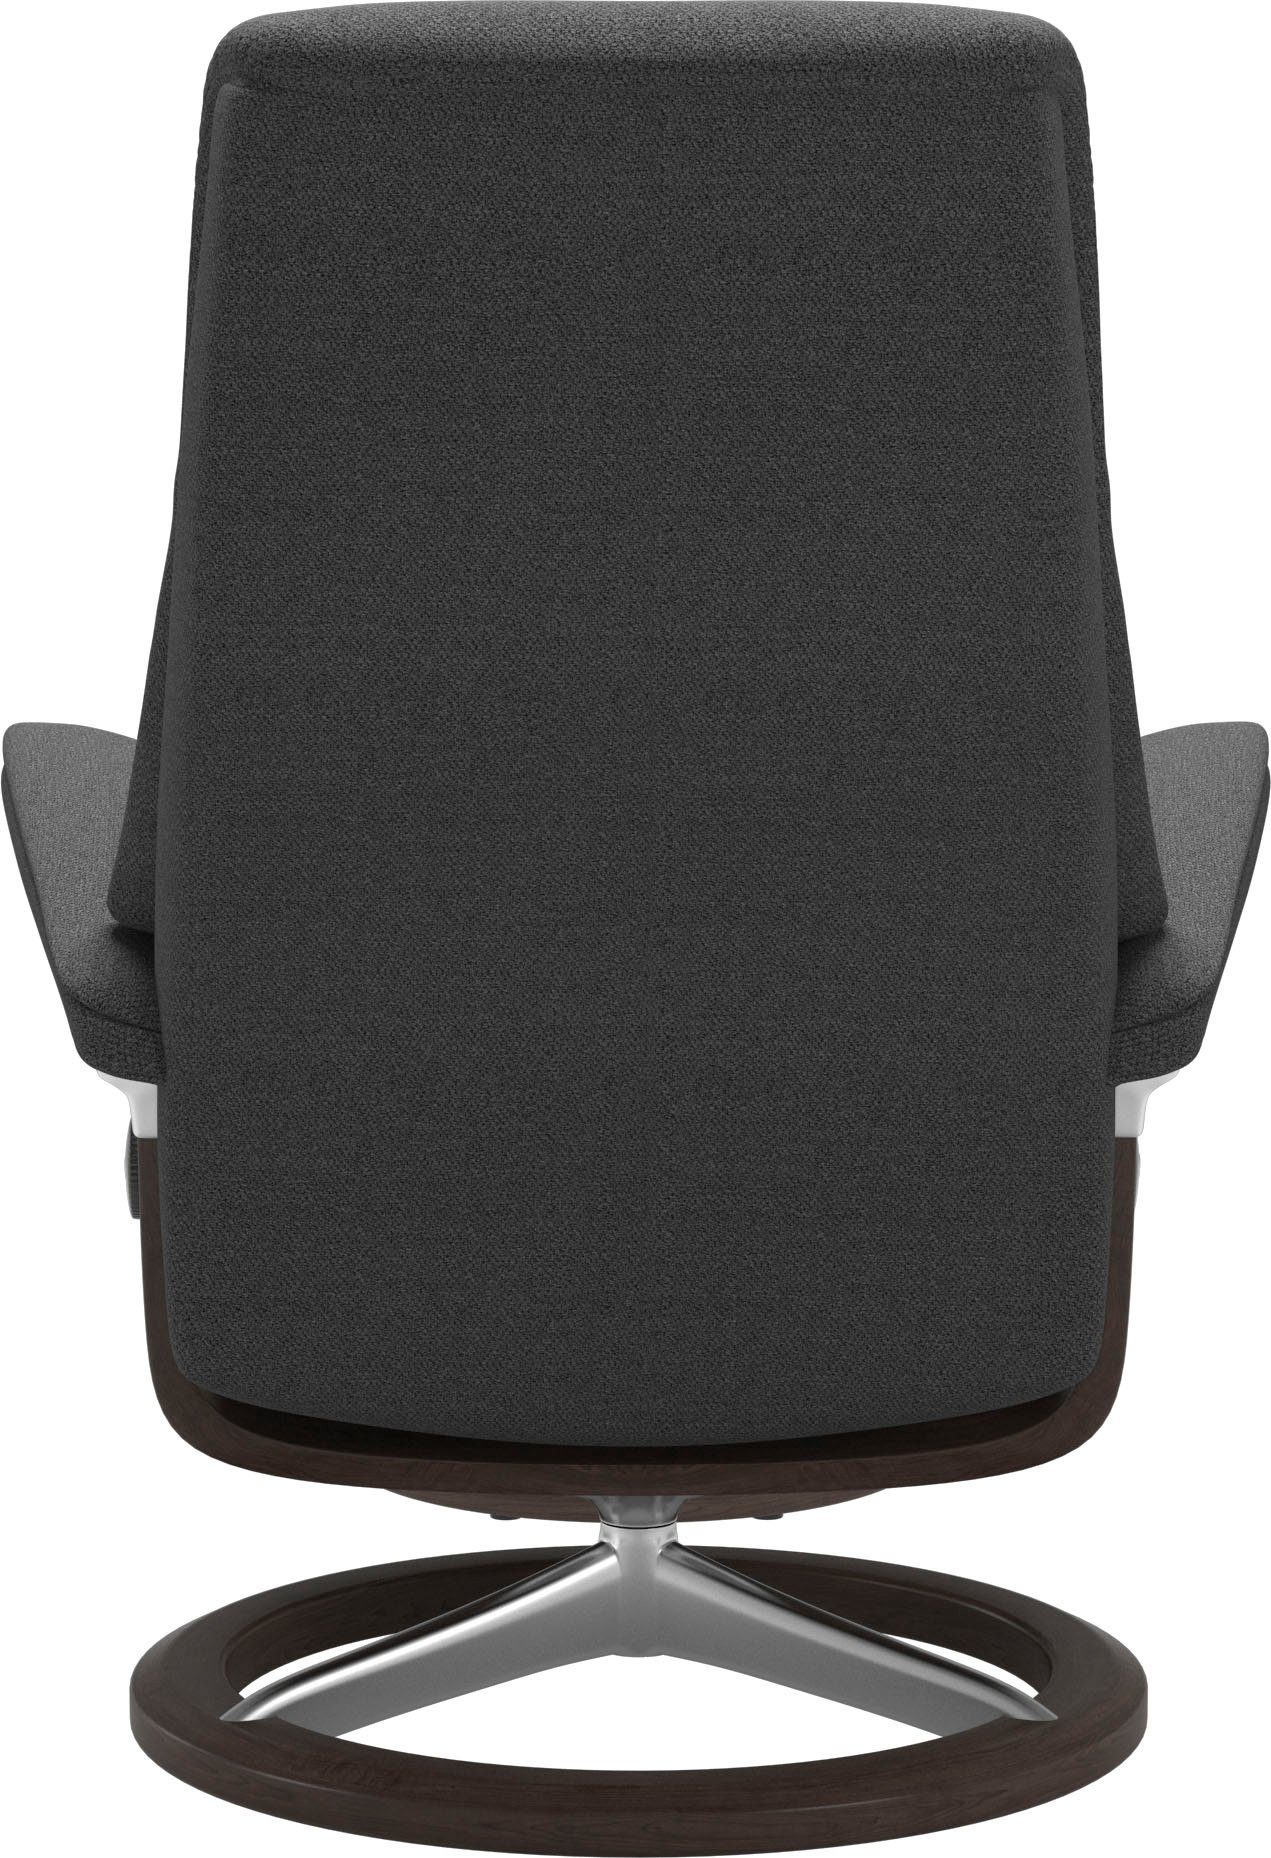 Größe Base, View, Signature S,Gestell Relaxsessel Wenge Stressless® mit